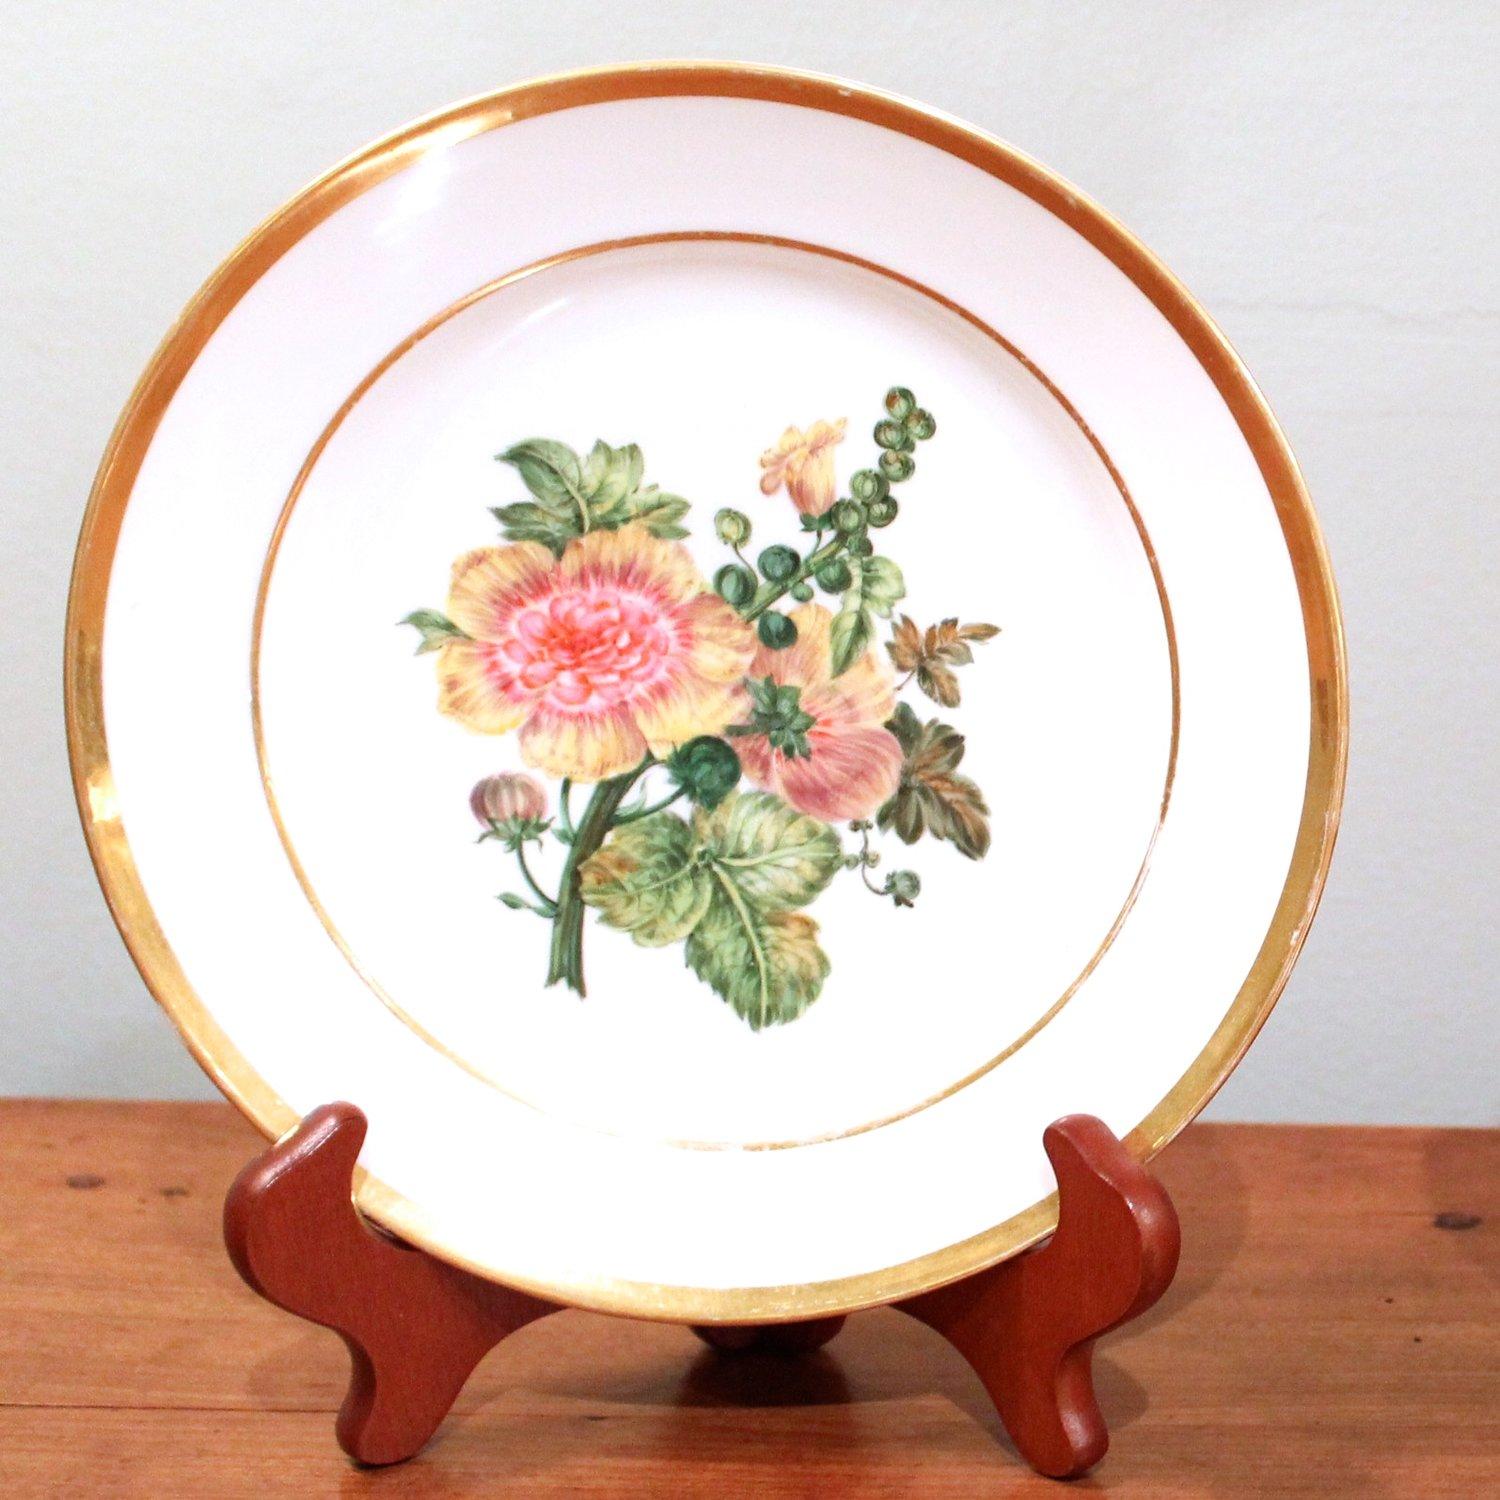 A fine pair of painted Paris Porcelain plates with gilt rims, one with a hollyhock, the other with a spray of various flowers including roses and Larkspur exquisitely painted. Provenance: private collection, prior to that, fine porcelain dealer